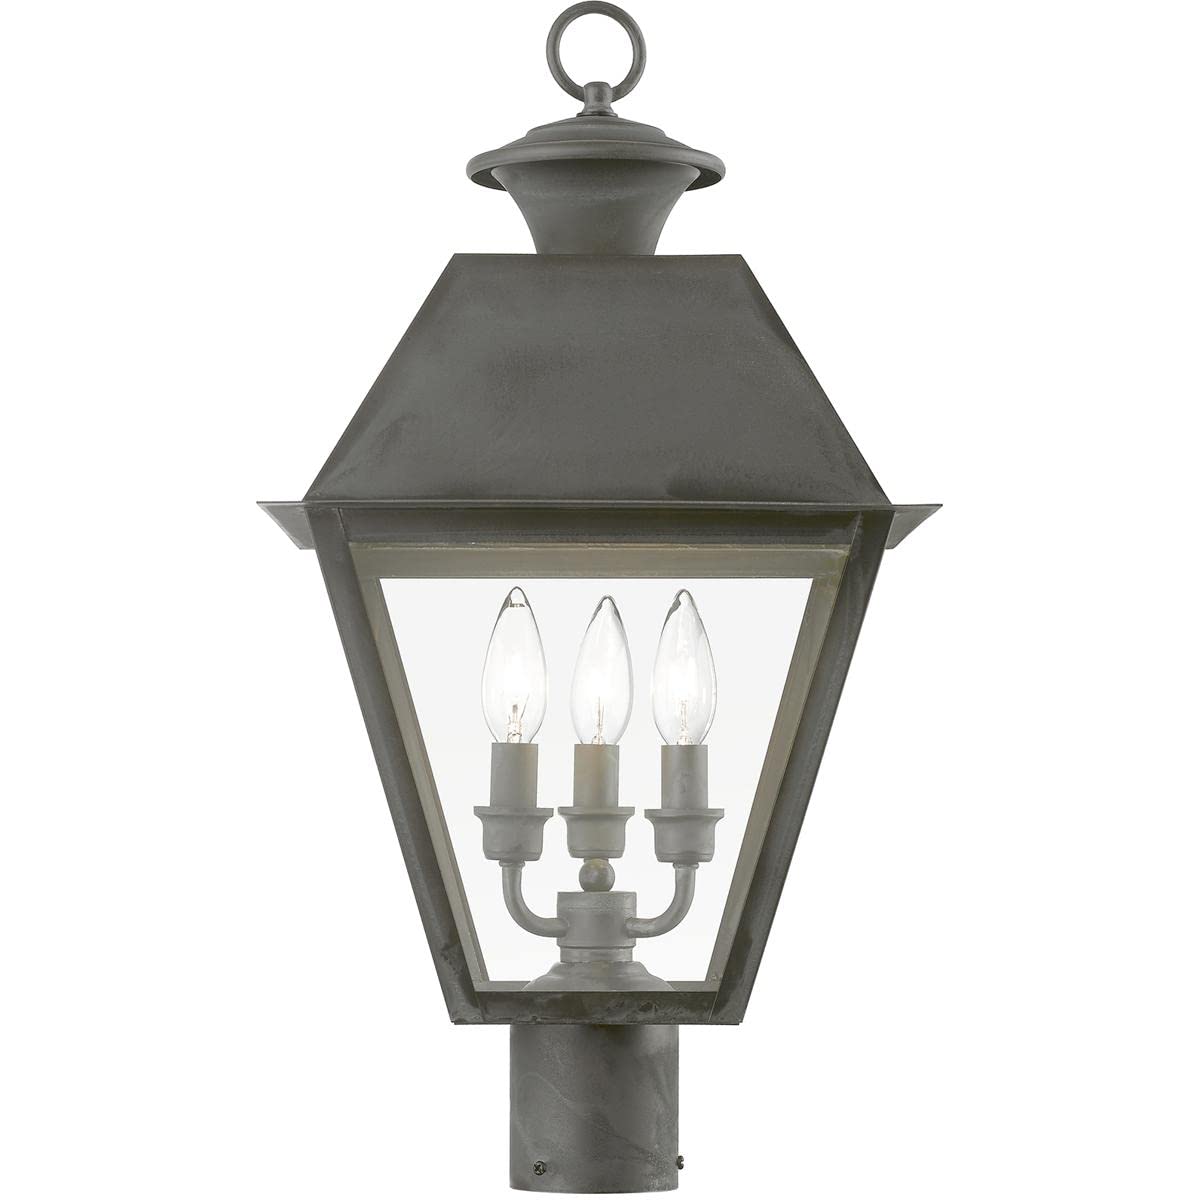 Livex Lighting 27219-61 Wentworth 3 Light 22 inch Charcoal Outdoor Post Top Lantern, Large